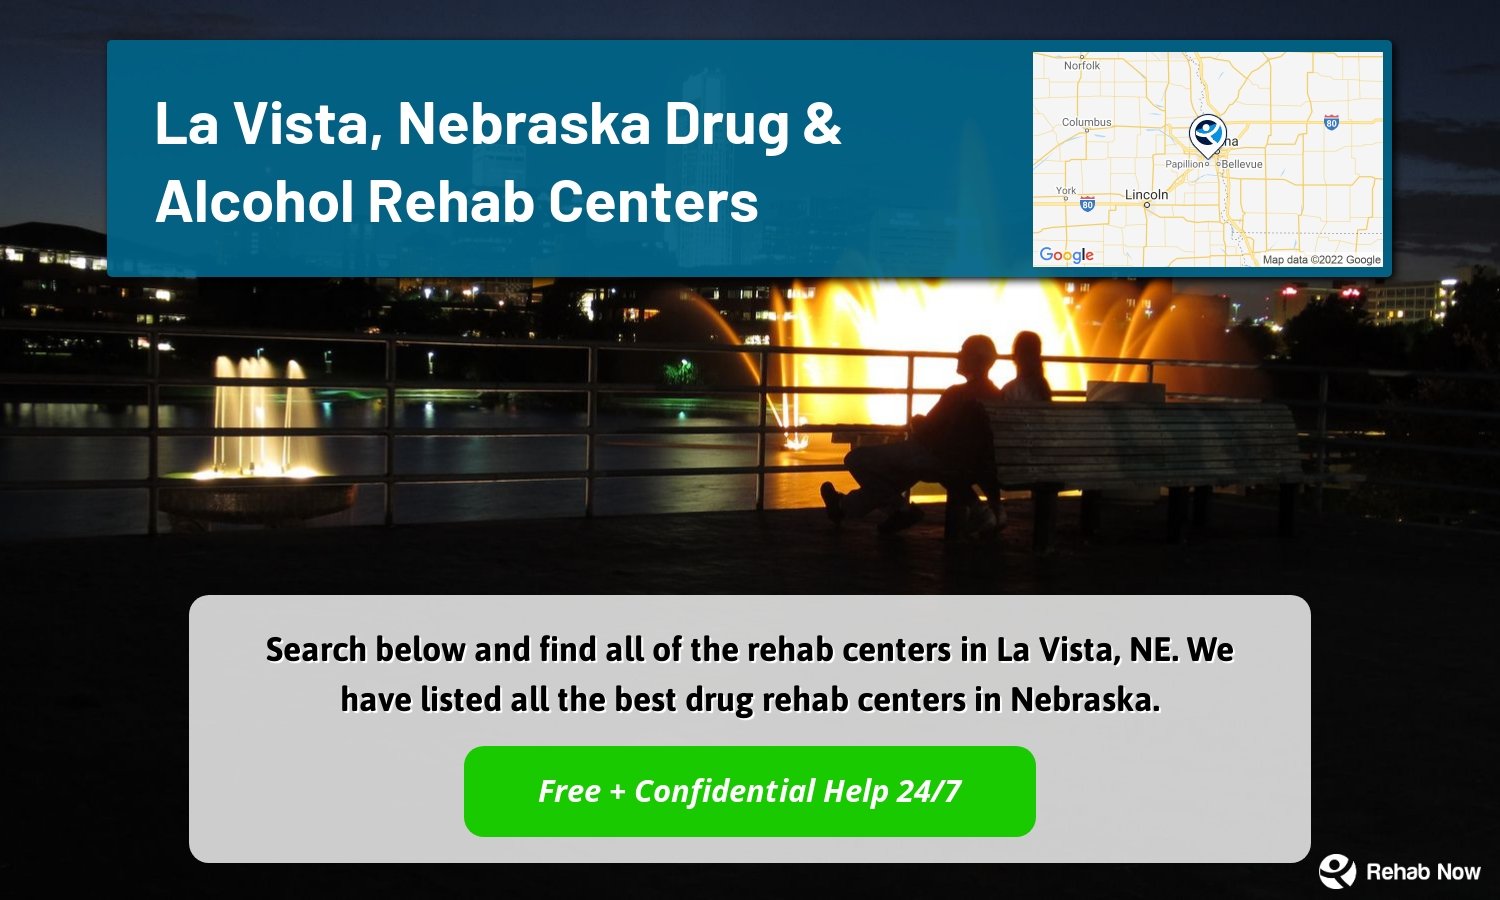 Search below and find all of the rehab centers in La Vista, NE. We have listed all the best drug rehab centers in Nebraska.